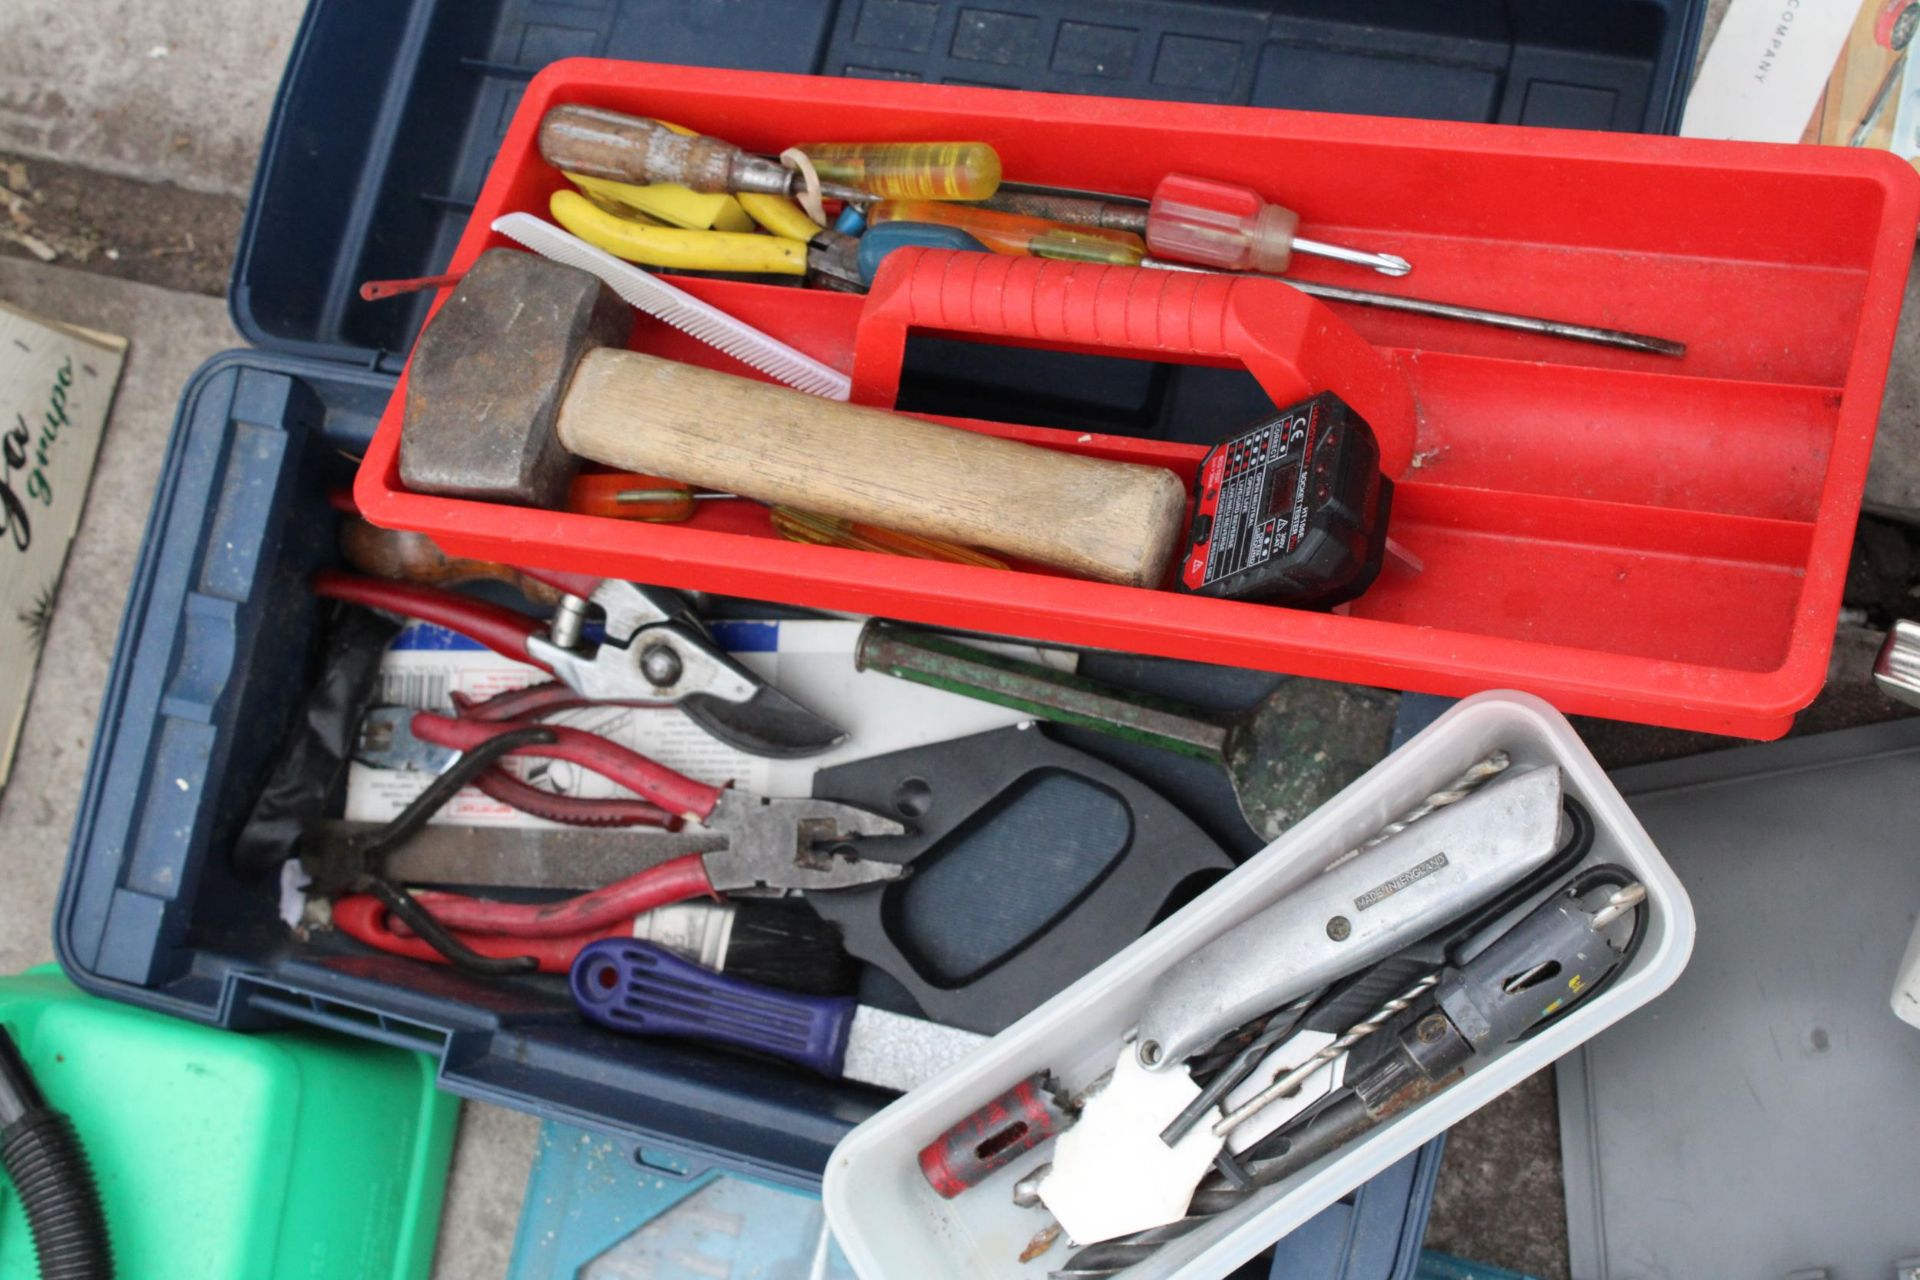 AN ASSORTMENT OF TOOLS TO INCLUDE A BOSCH DRILL, A DRILL BIT SET AND A TOOL BOX WITH AN ASSORTMENT - Image 3 of 4